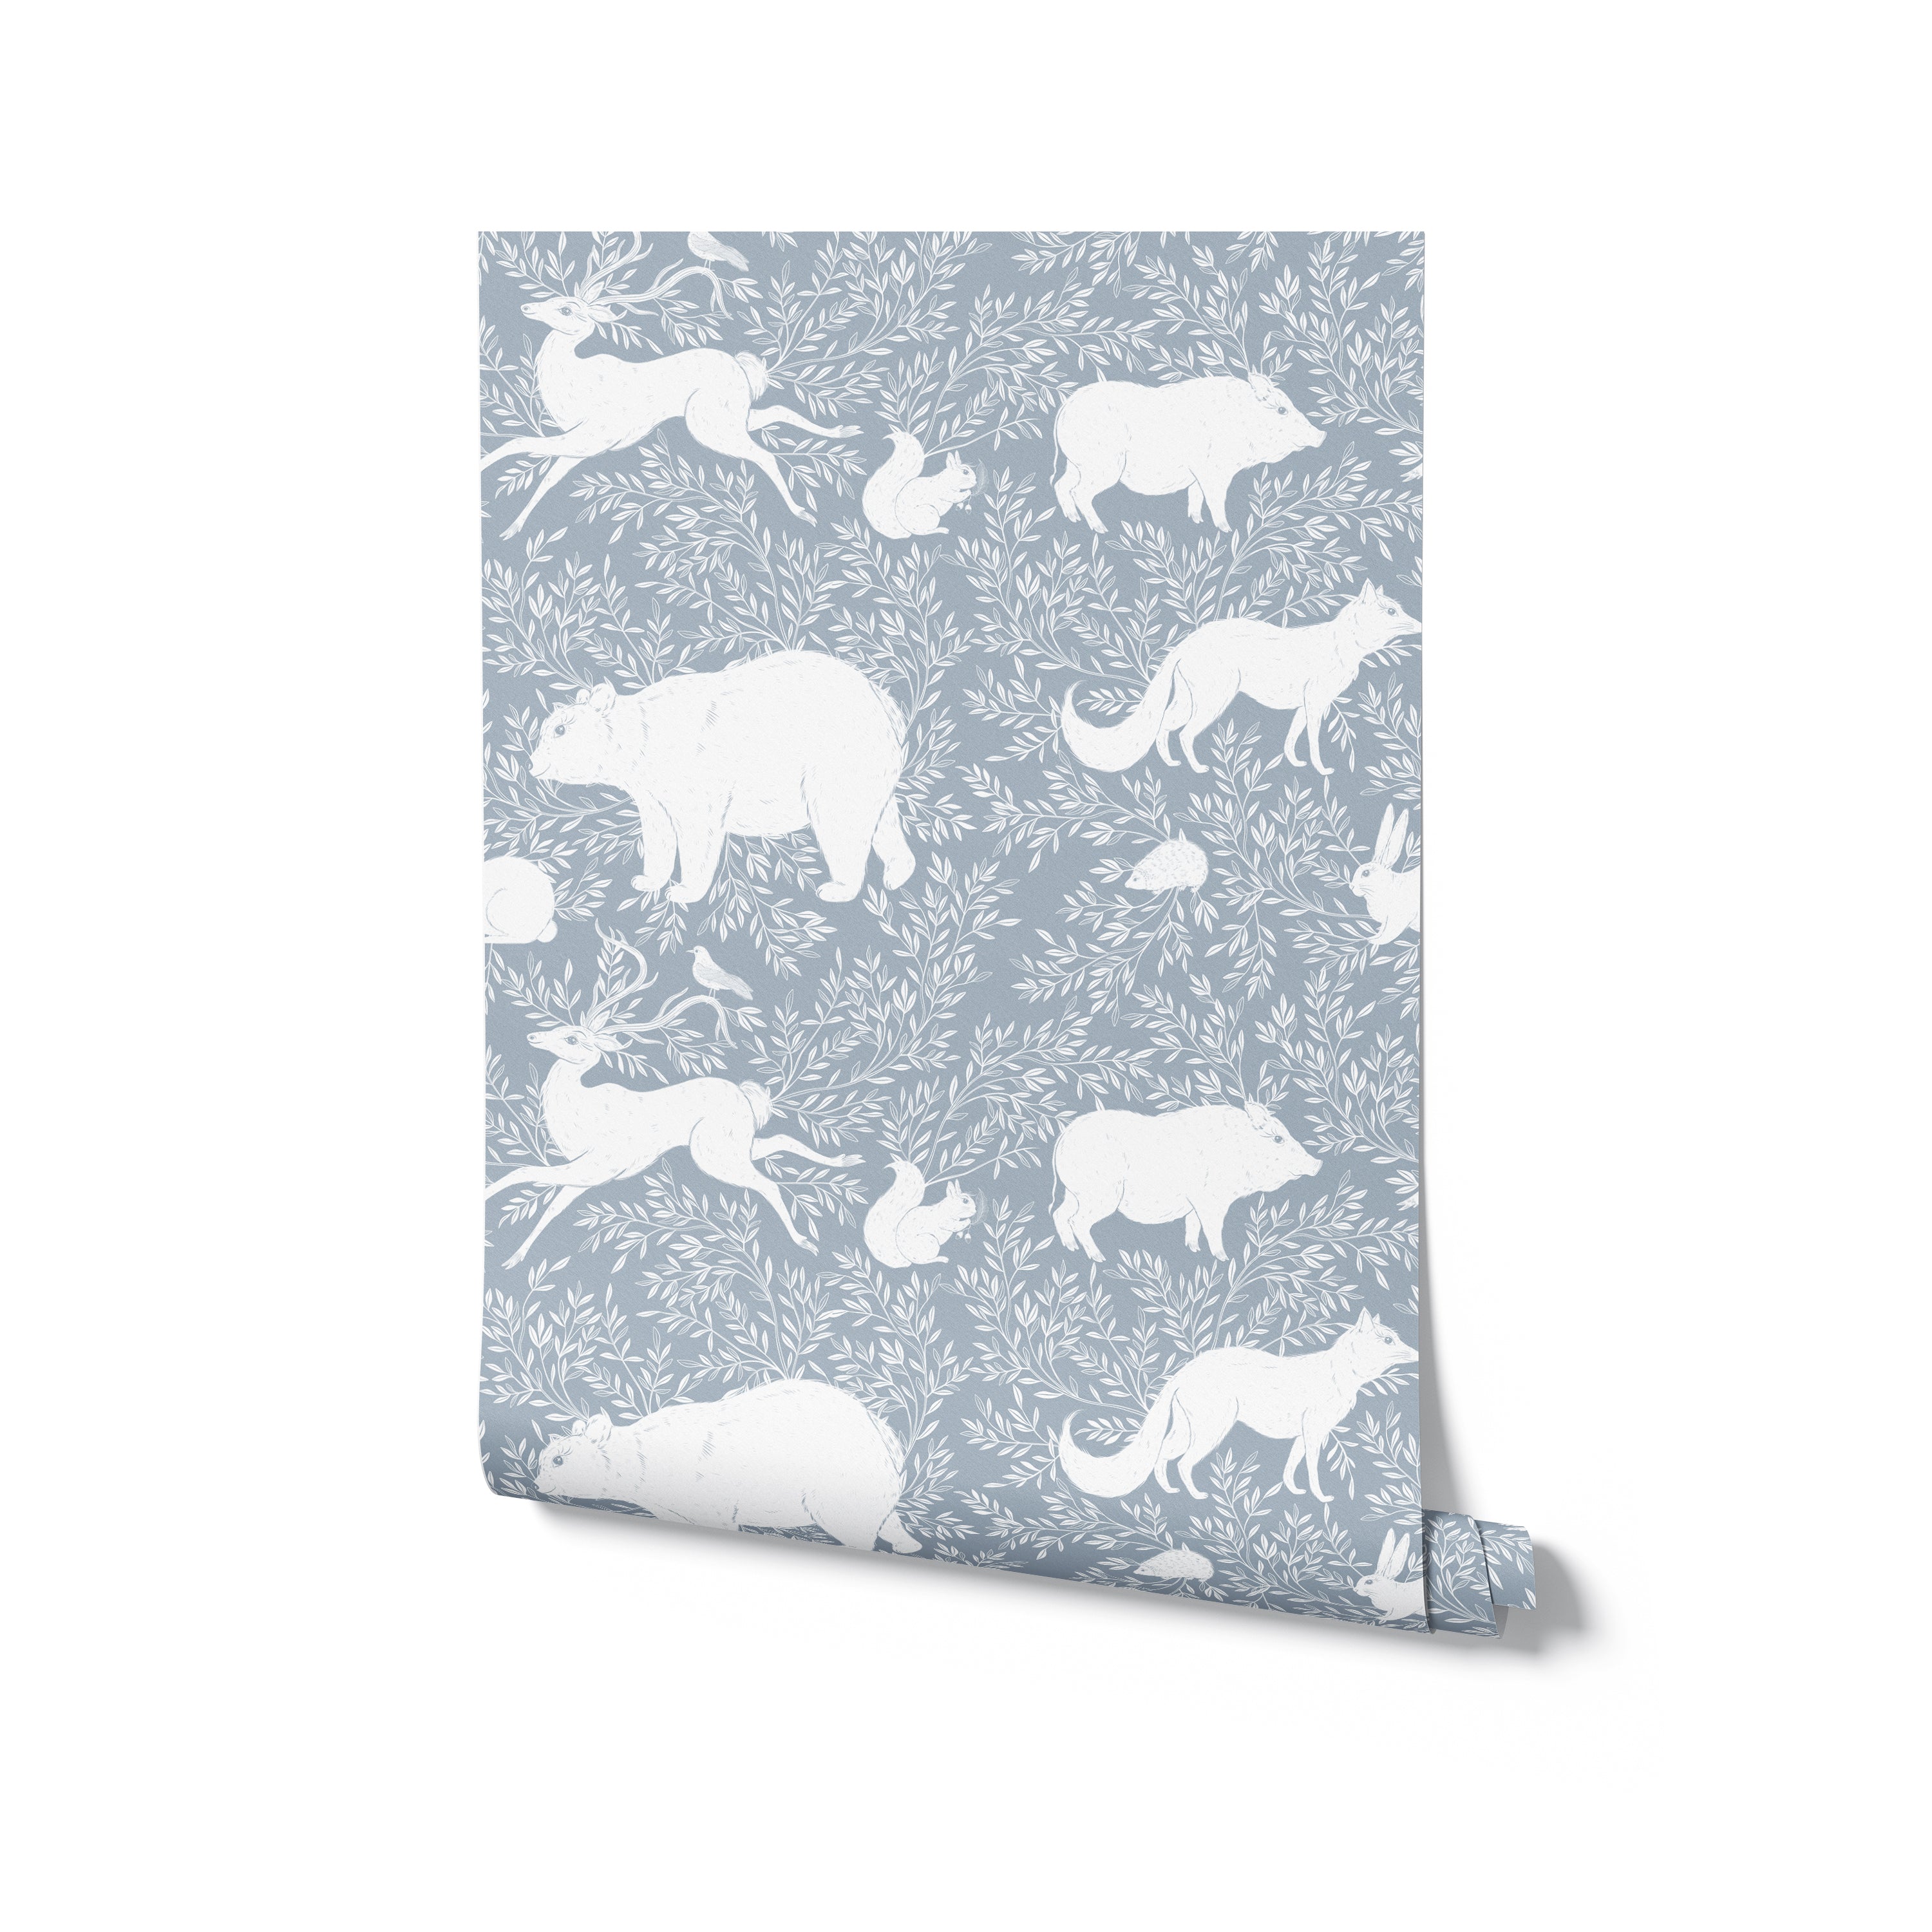 A roll of pale blue wallpaper showcasing a pattern of white woodland animals including bears, foxes, and rabbits, creating a charming and nature-inspired design suitable for various interior settings